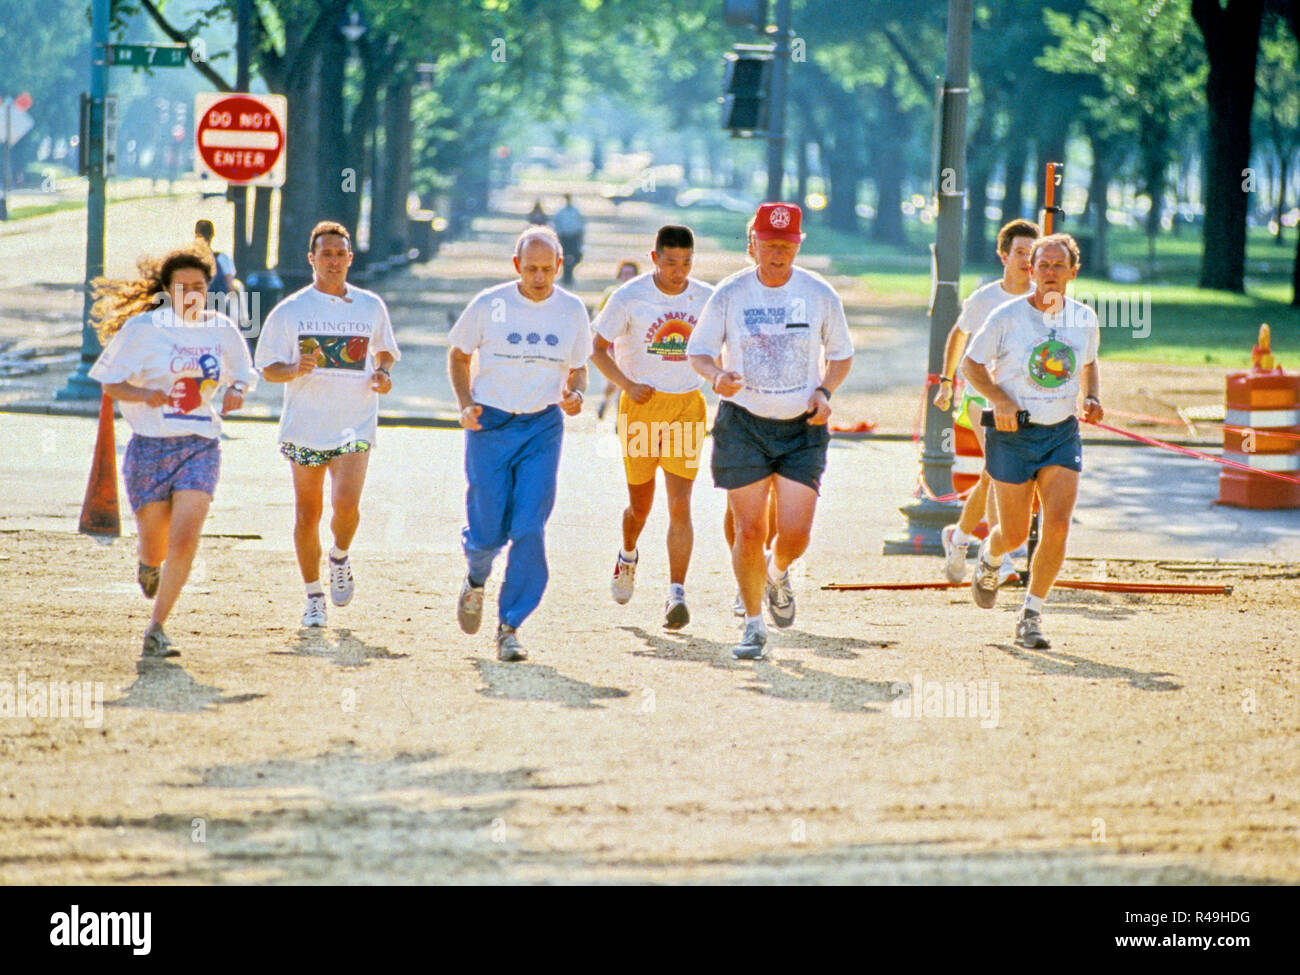 United States President Bill Clinton, third right, goes jogging with Chief Judge Stephen Breyer, of the US Court of Appeals for the First Circuit, third left, along the Mall in Washington, DC on May 16, 1994. The President nominated Judge Breyer to be Associate Justice of the Supreme Court to replace Justice Harry Blackmun, who is retiring. Judge Breyer's daughter is at the far left. Credit: Jeff Markowitz/Pool via CNP | usage worldwide Stock Photo